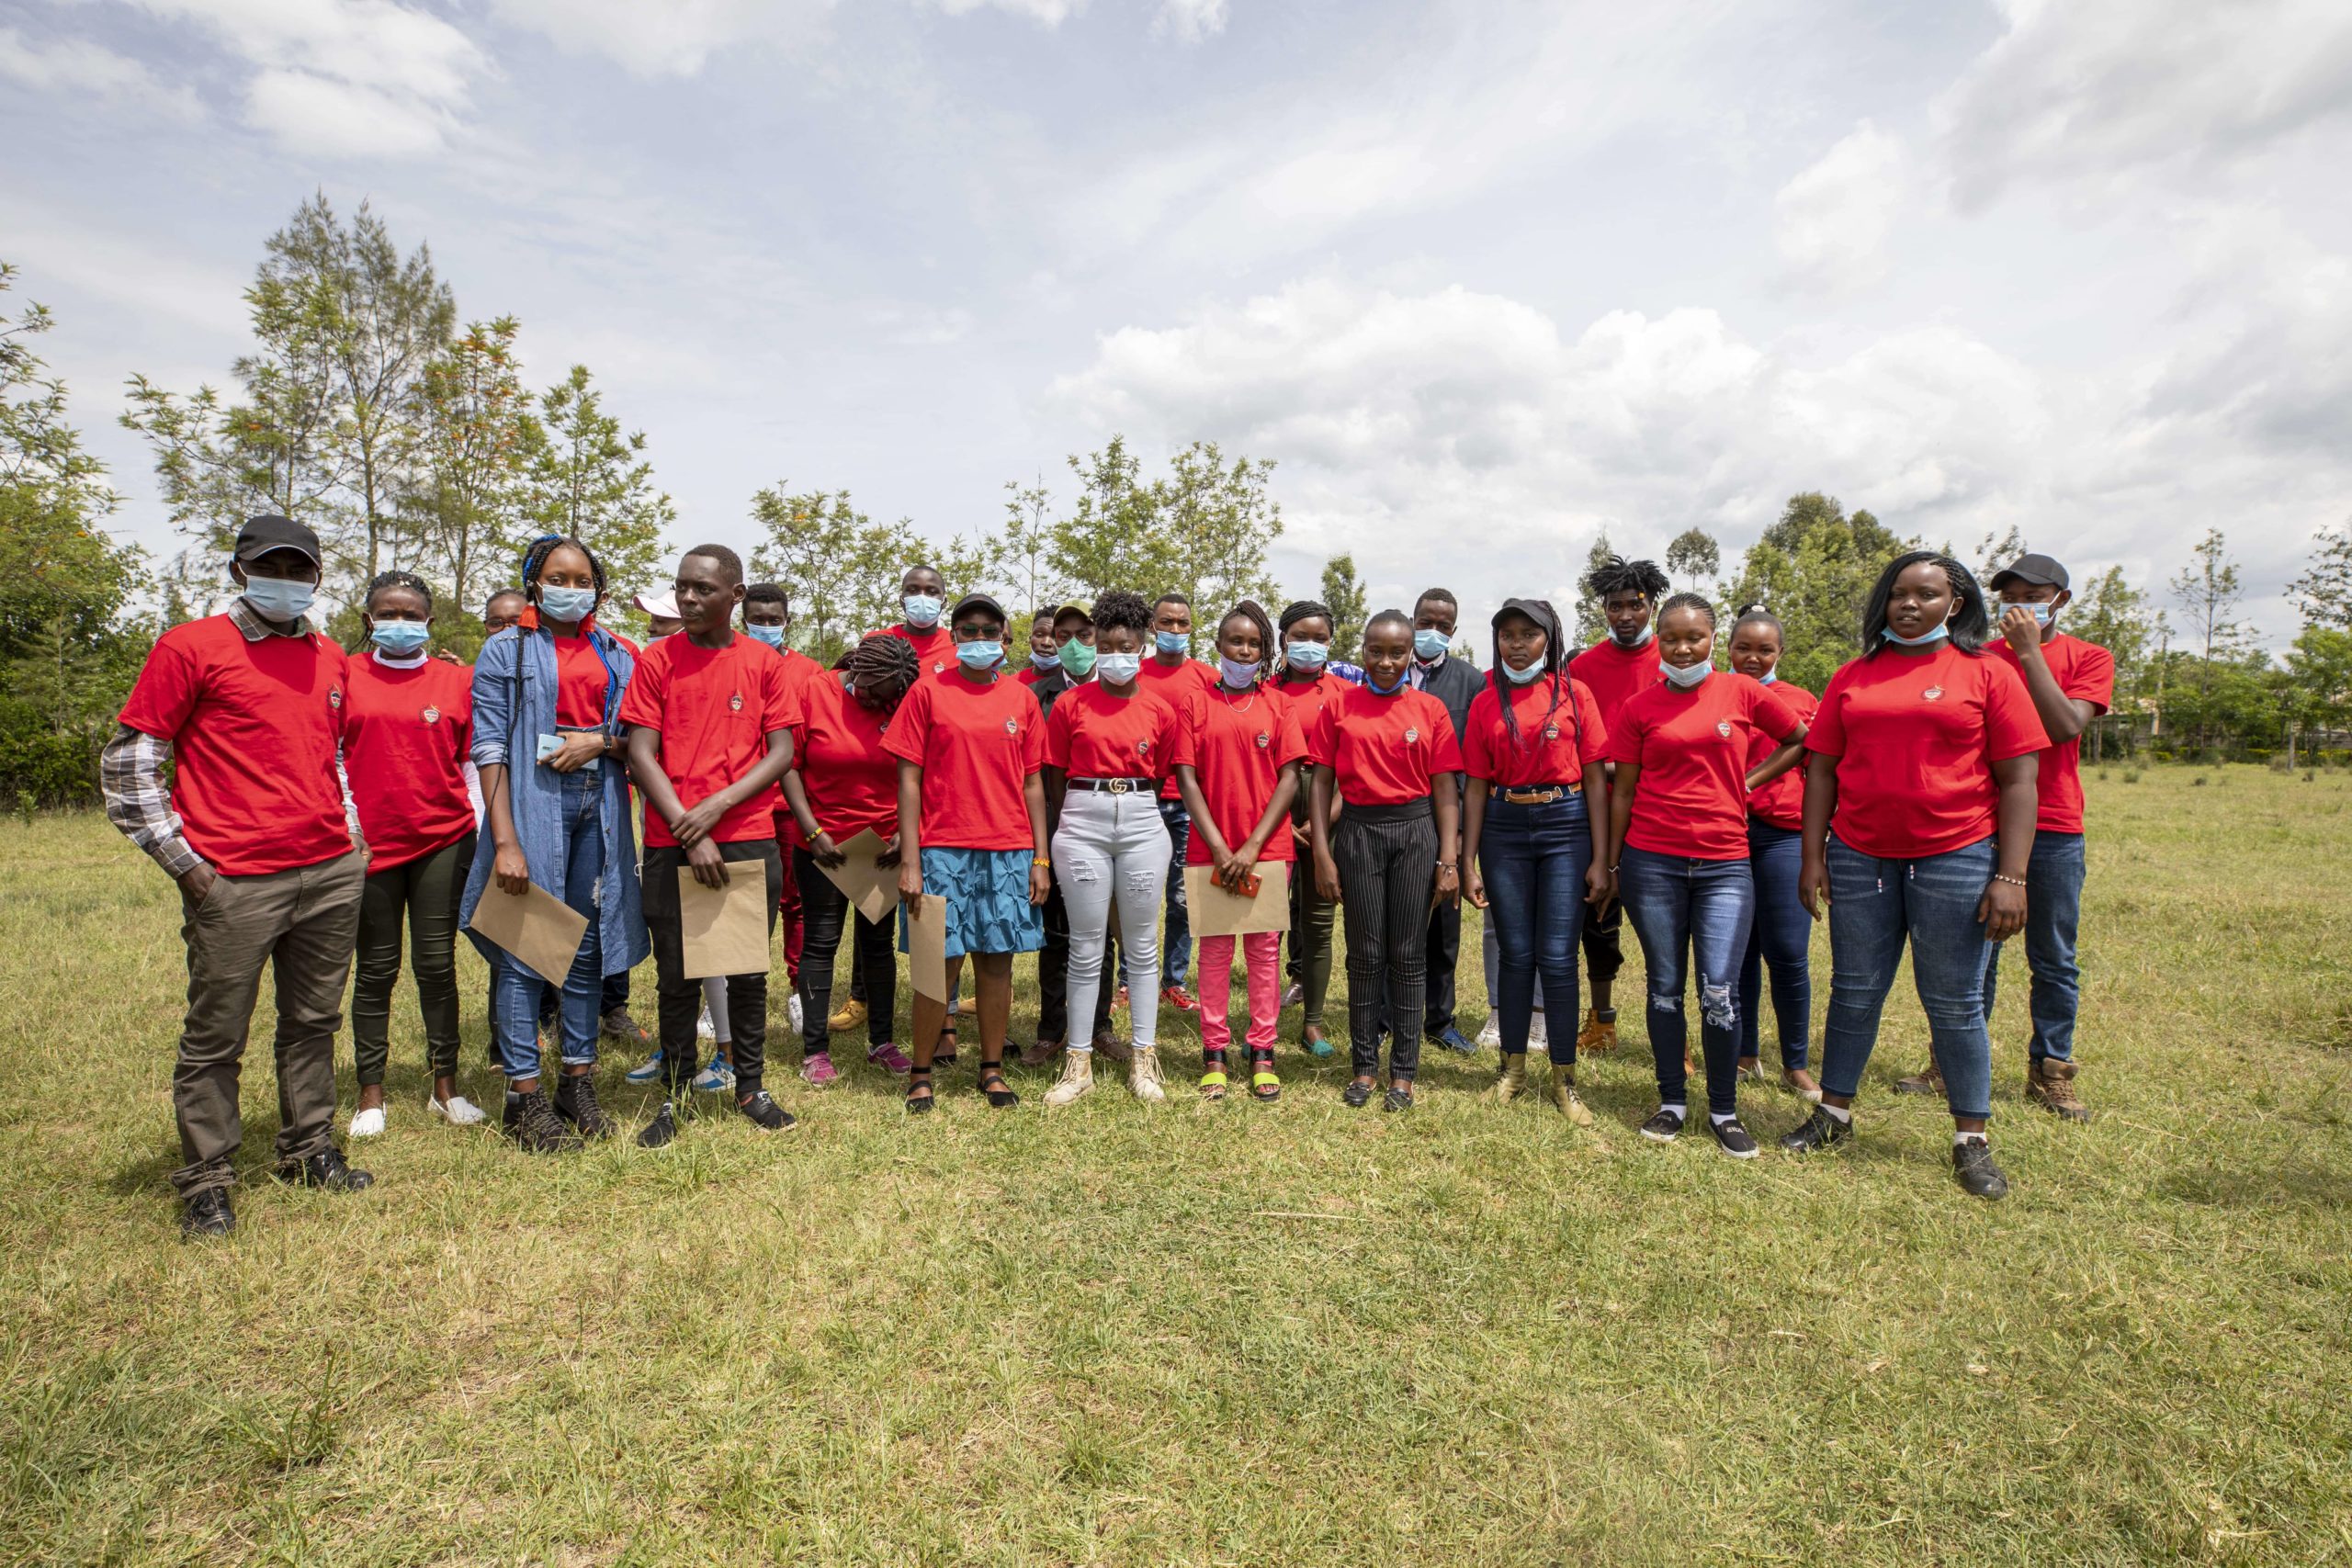 Huawei DigiTruck celebrates 1st anniversary with 1,500 youth trained